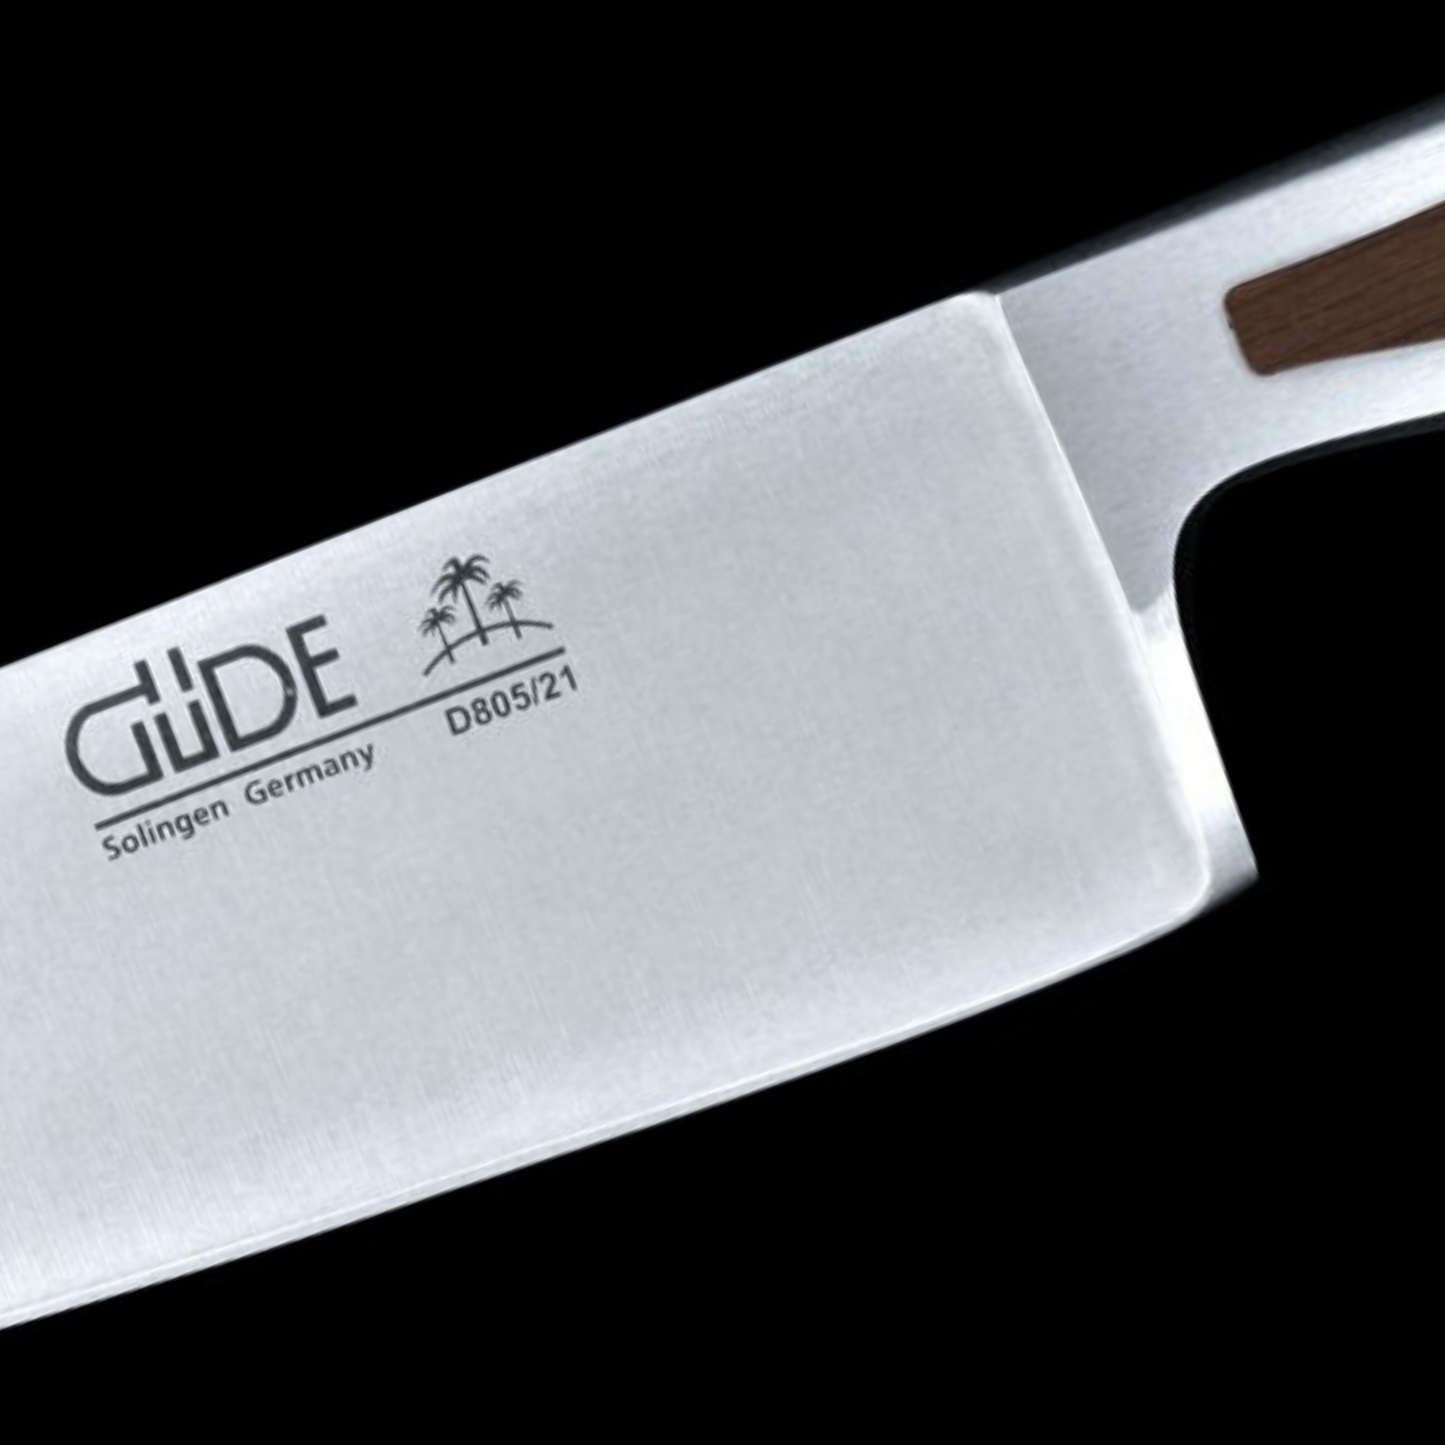 Gude Delta Series Forged Double Bolster Chef's Knife 8", African Black Wood Handle - GuedeUSA